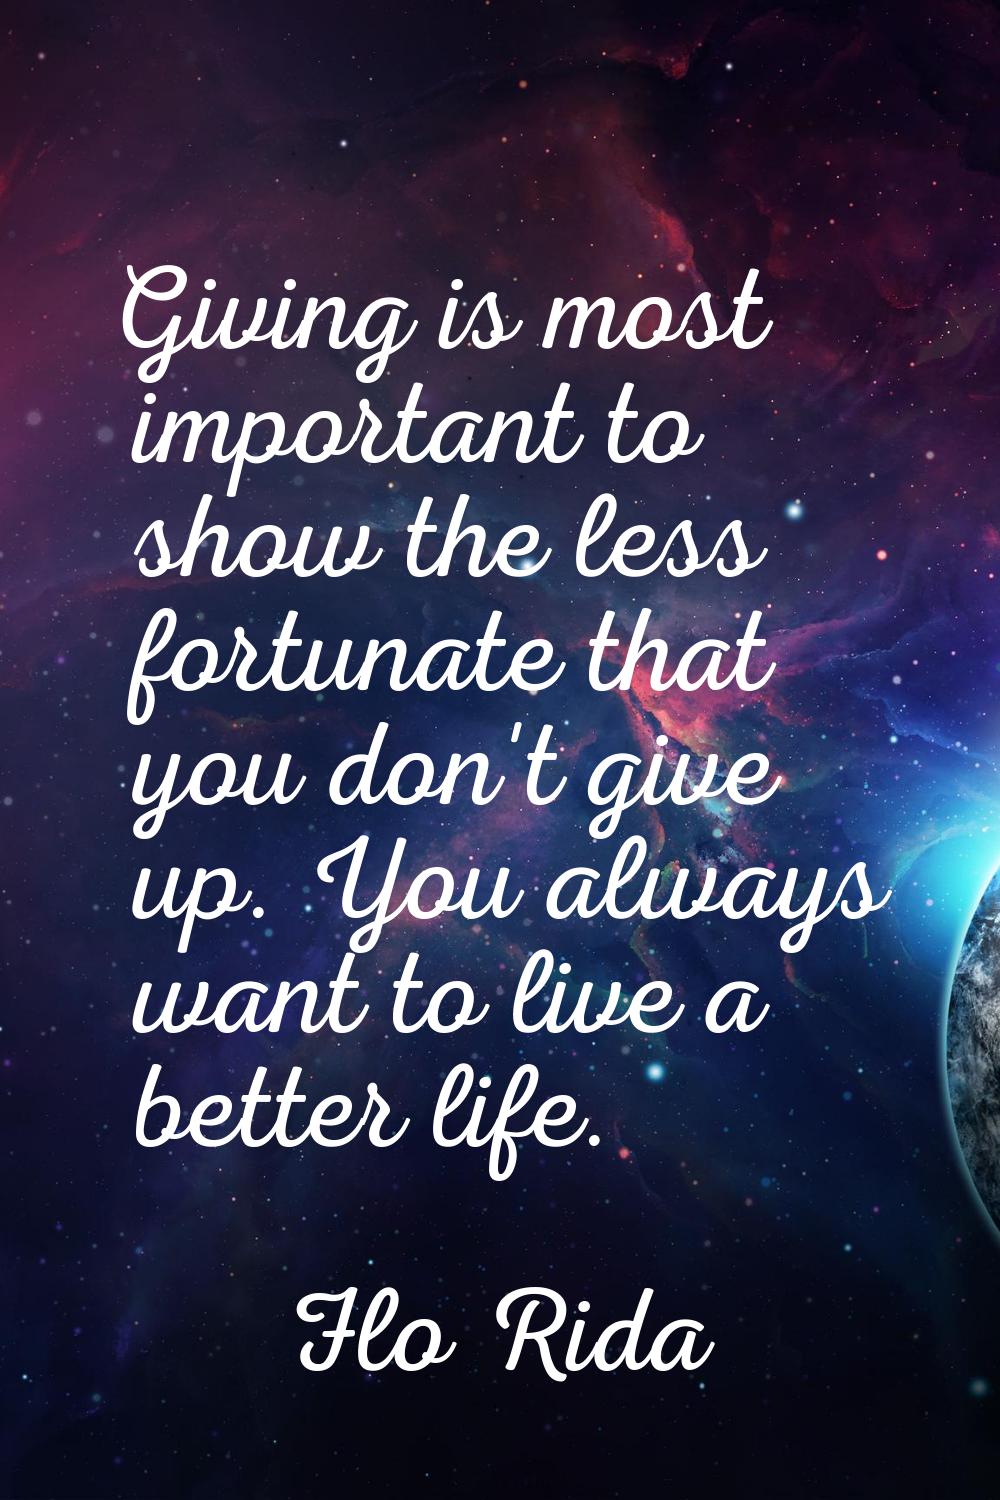 Giving is most important to show the less fortunate that you don't give up. You always want to live